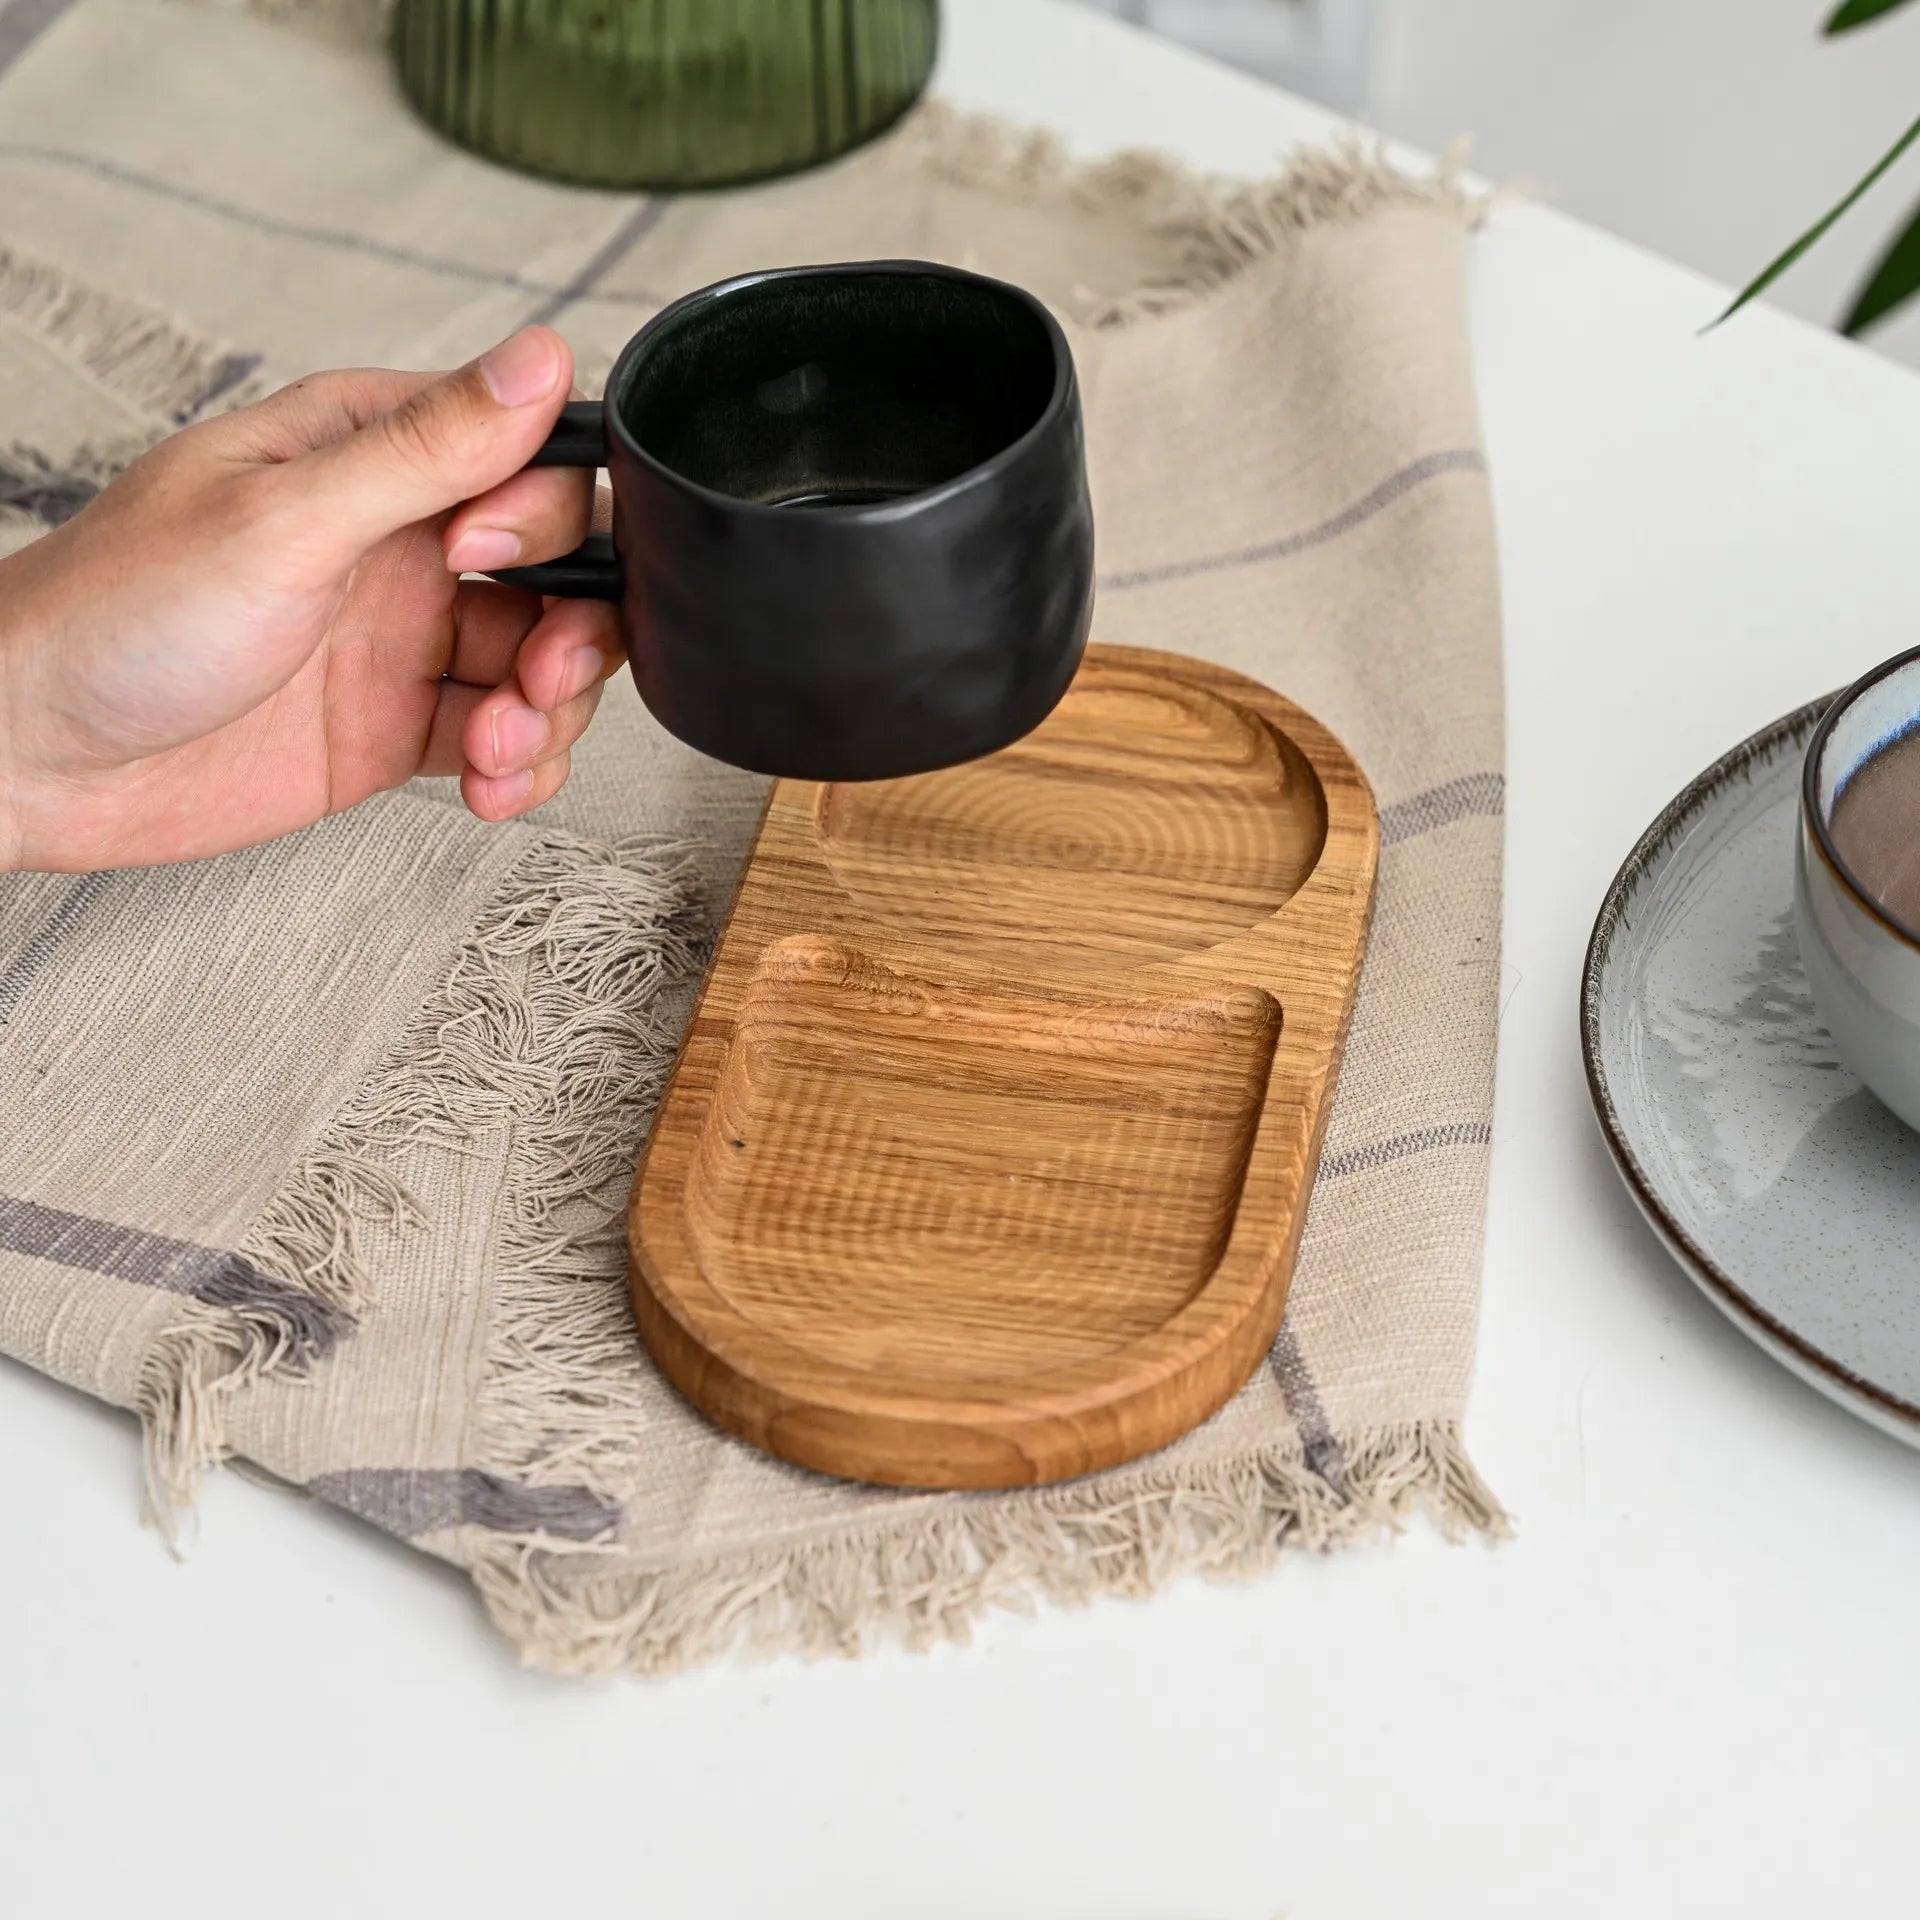 Rustic serving tray for hotels, crafted from wood, ideal for delivering a warm and welcoming presentation.